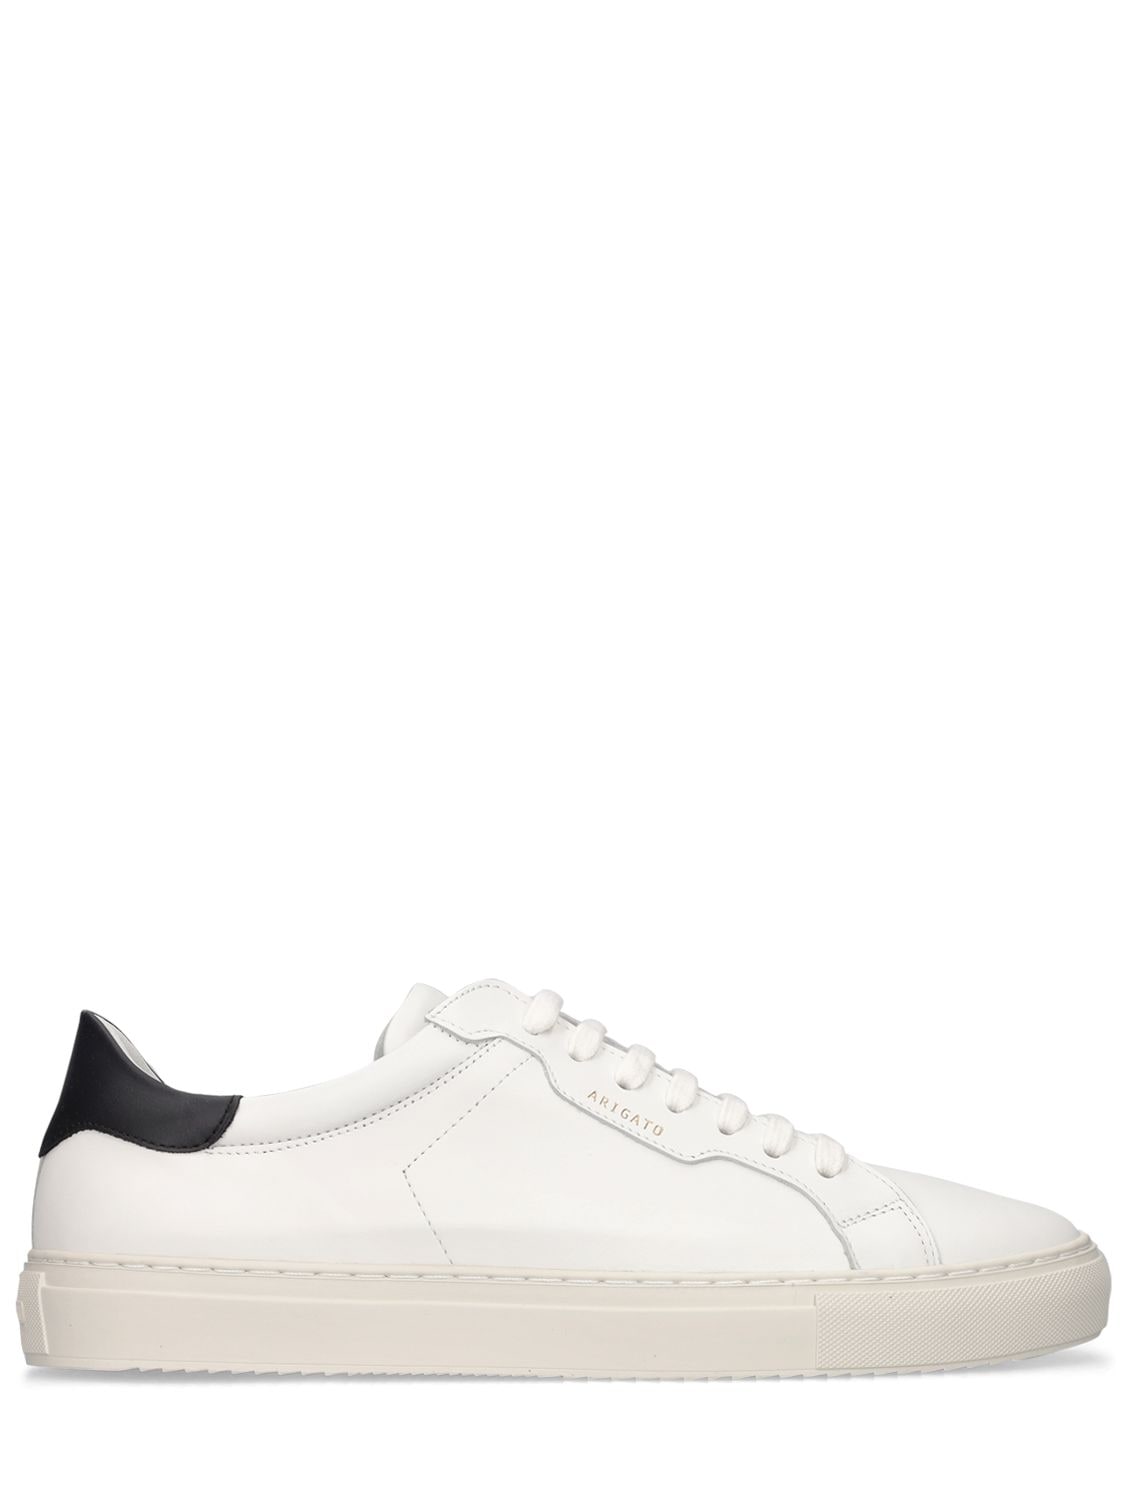 Clean 180 Leather Sneakers